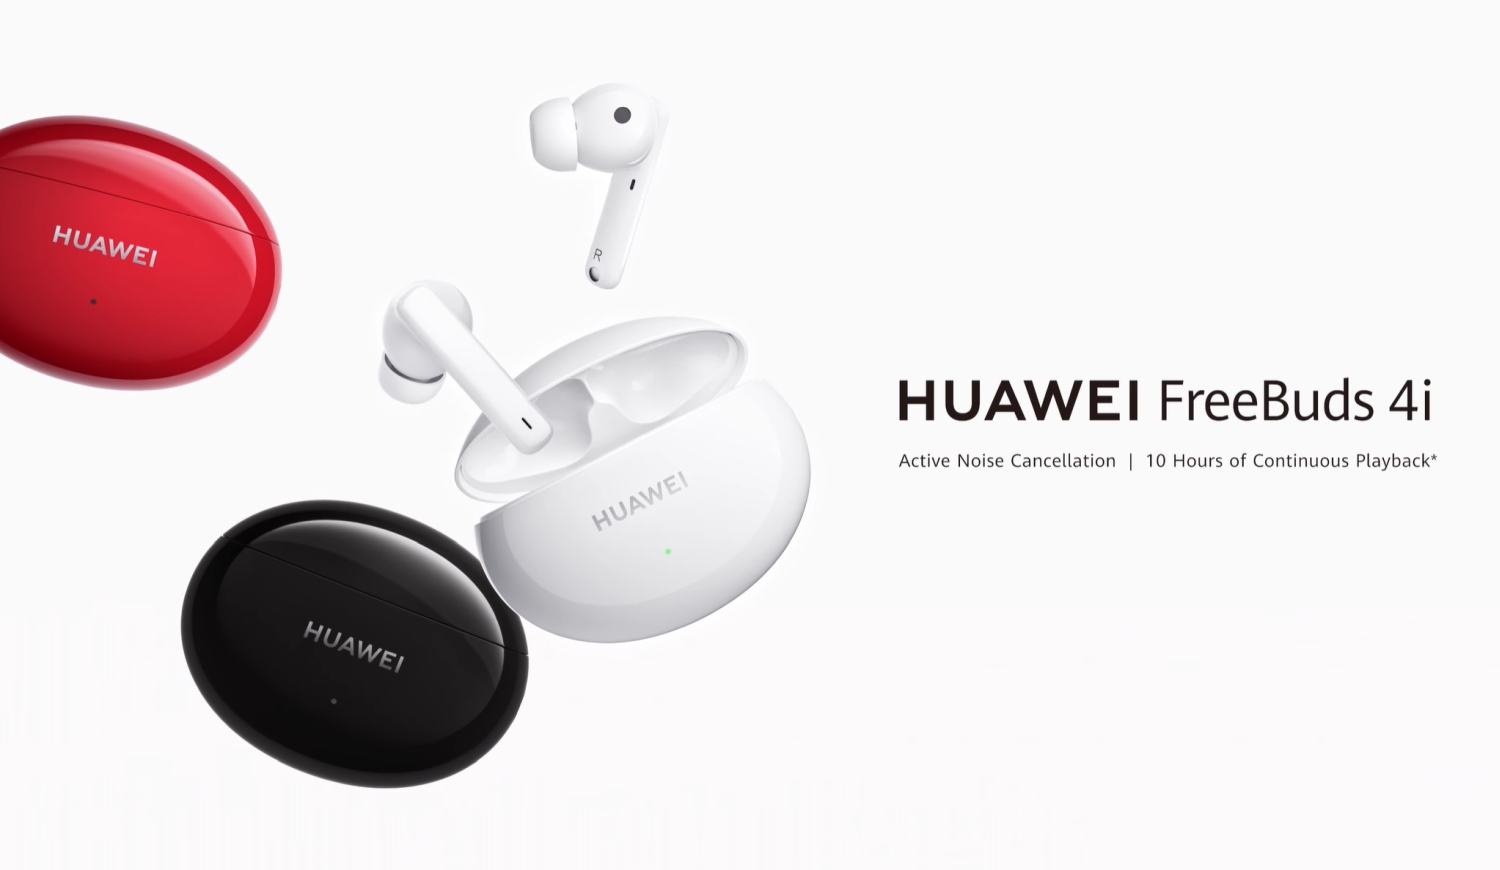 Huawei FreeBuds 4i with ANC offers up to 10 hours of music playback,  available for RM319 on 27 March